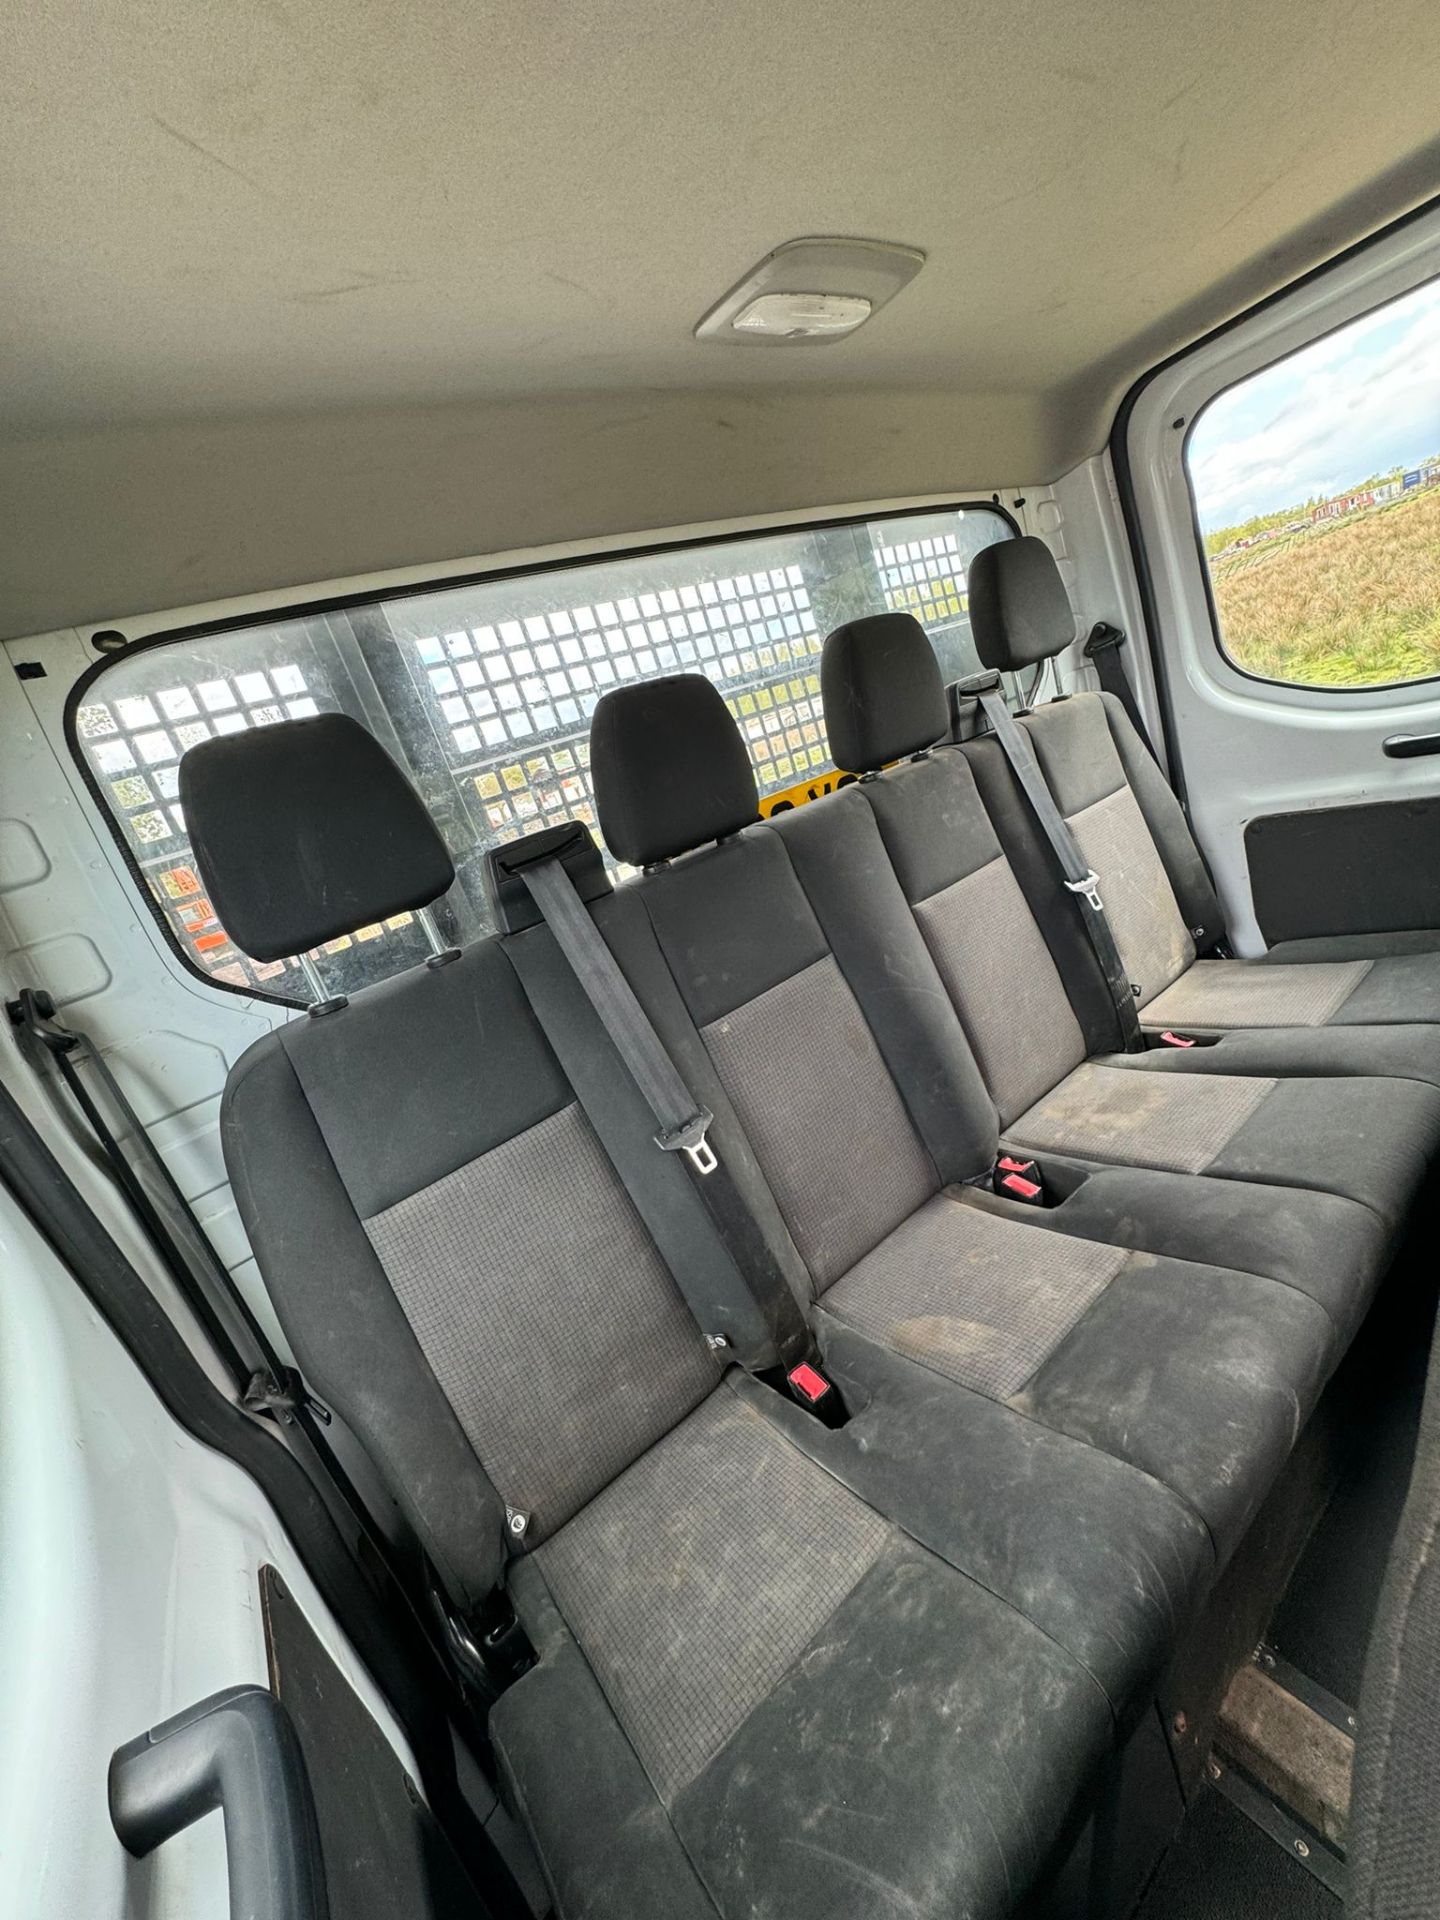 >>>SPECIAL CLEARANCE<<< 96K MILES ONLY** FORD TRANSIT TIPPER 2020 DOUBLE CAB TRUCK - Bild 15 aus 15